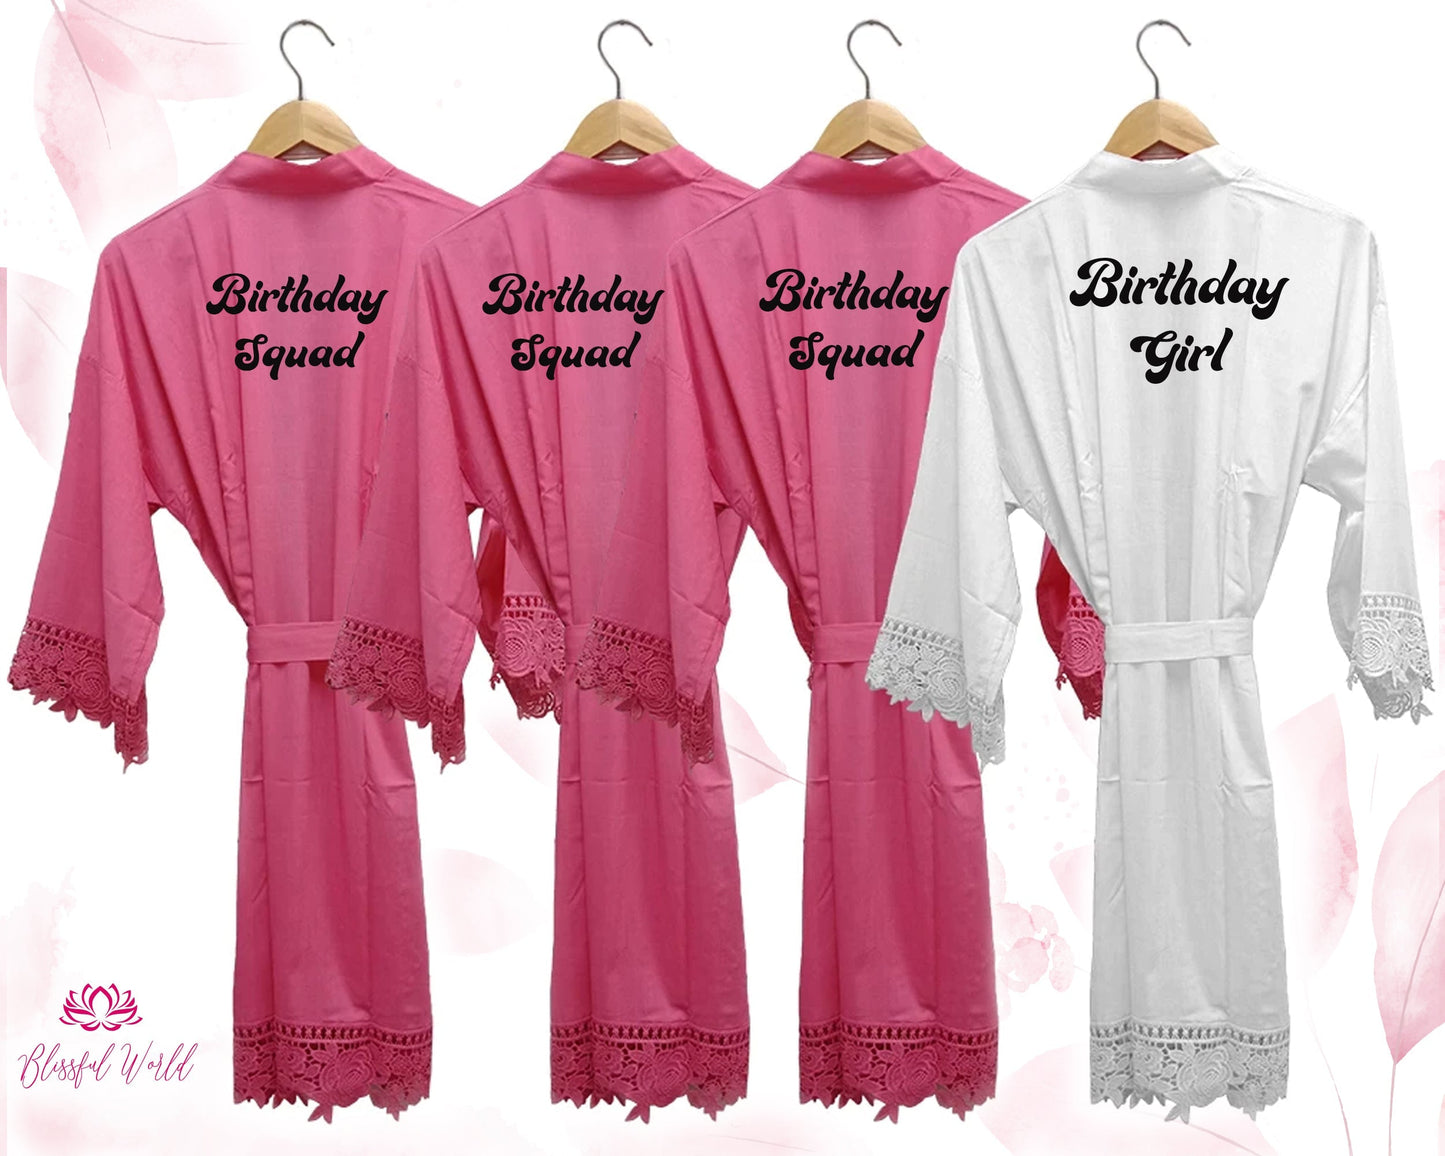 Wedding dressing gown | Cotton and Lace Robes | Personalised | Bridesmaid | Bride to be | Wedding party gifts | Bridal dressing gowns